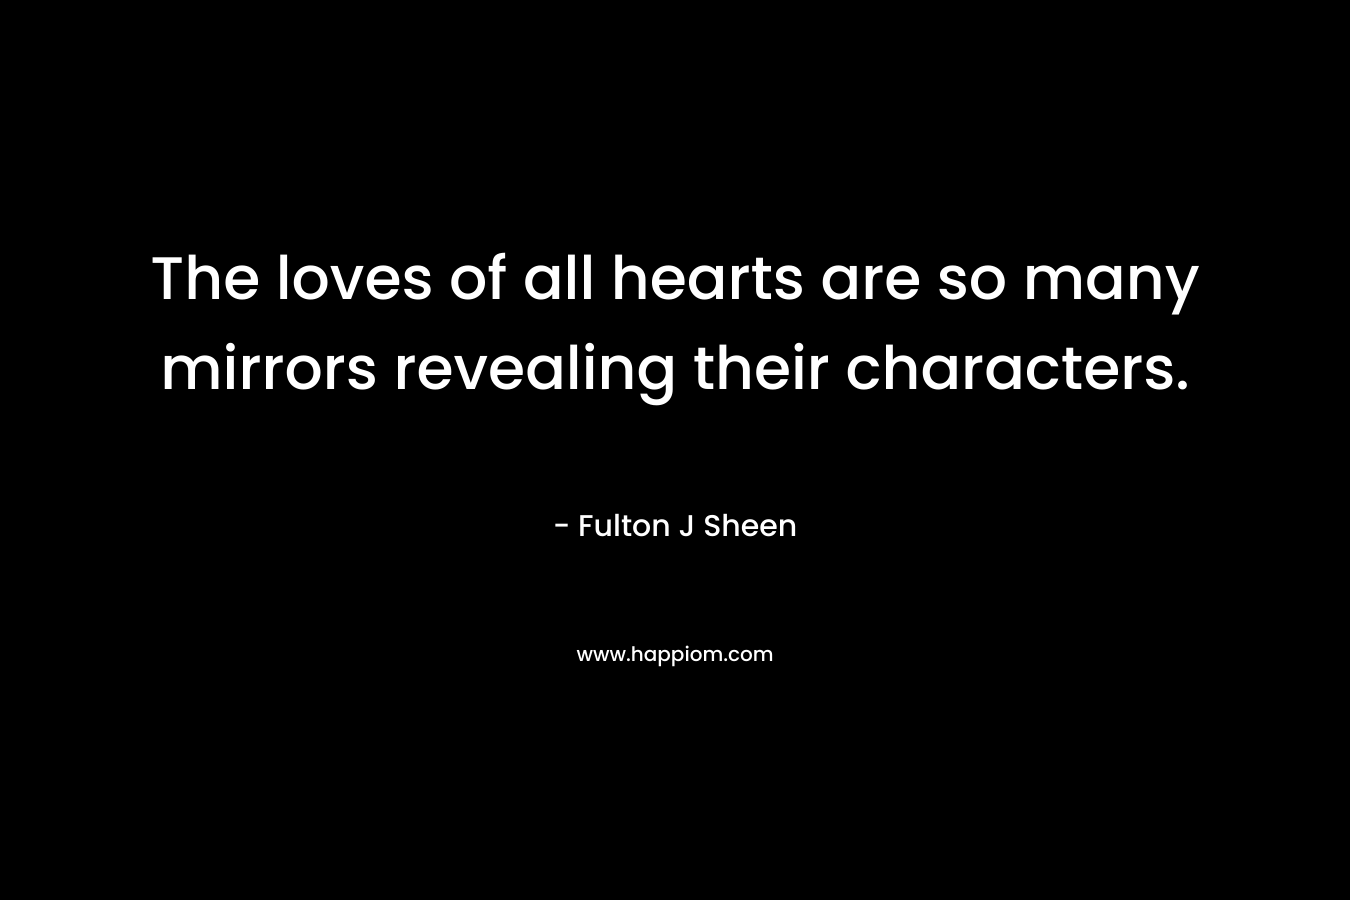 The loves of all hearts are so many mirrors revealing their characters.